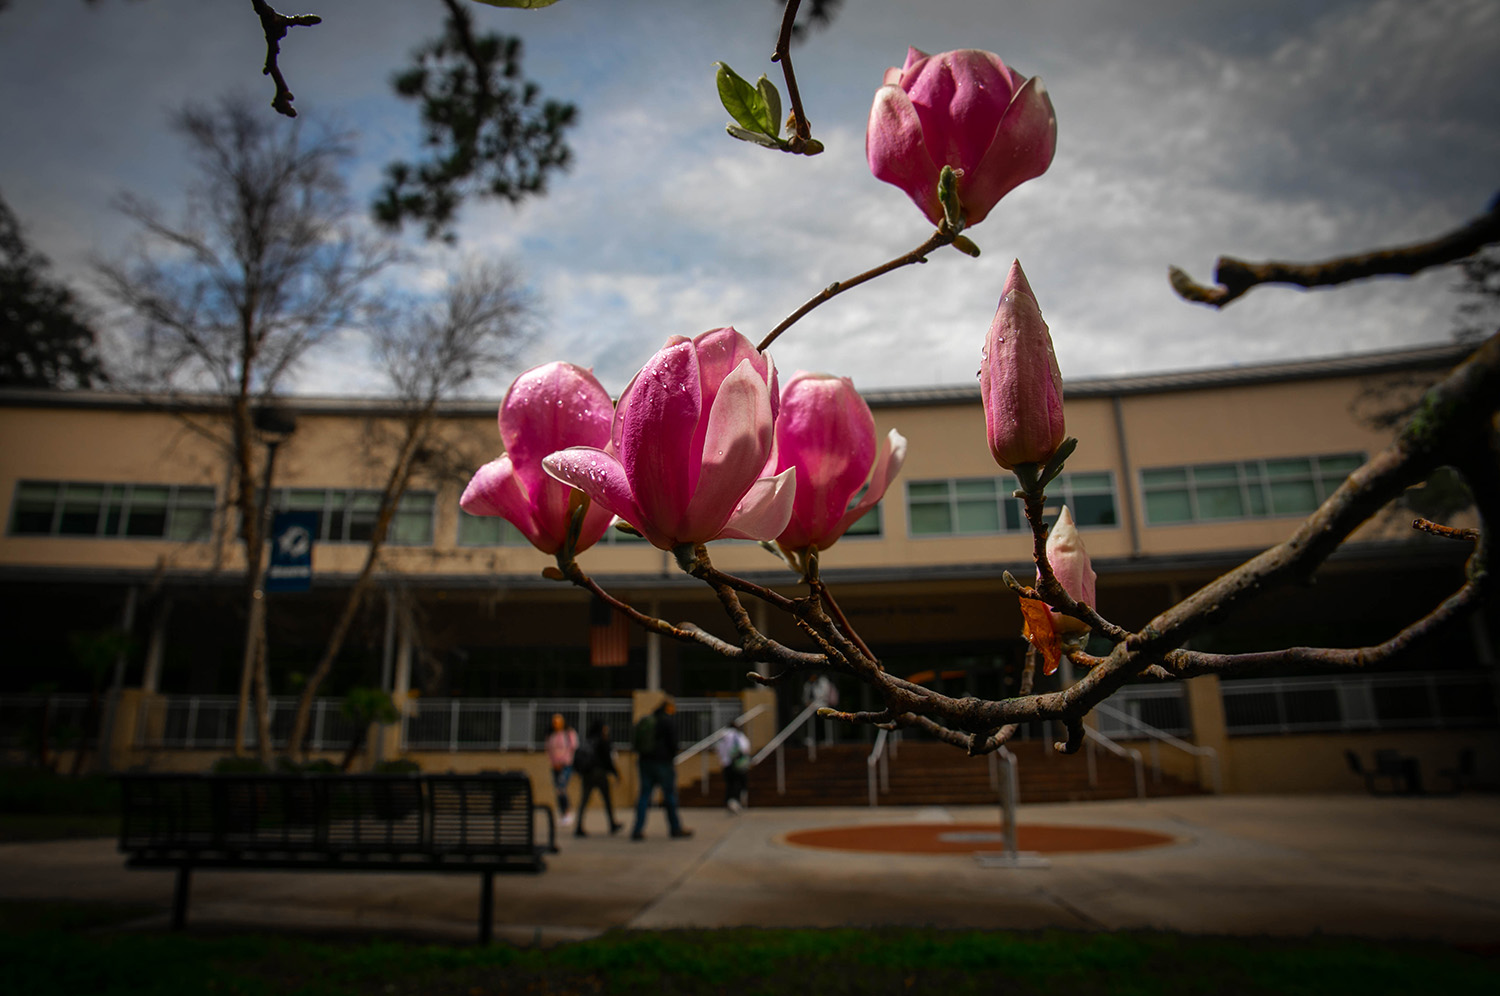 A Chinese magnolia tree blooms outside the Lawrence W. Tyree Library at Santa Fe College photographed on Jan. 29, 2020 in Gainesville, Fla.  (Matt Stamey/Santa Fe College ) ***Subjects Have Releases***